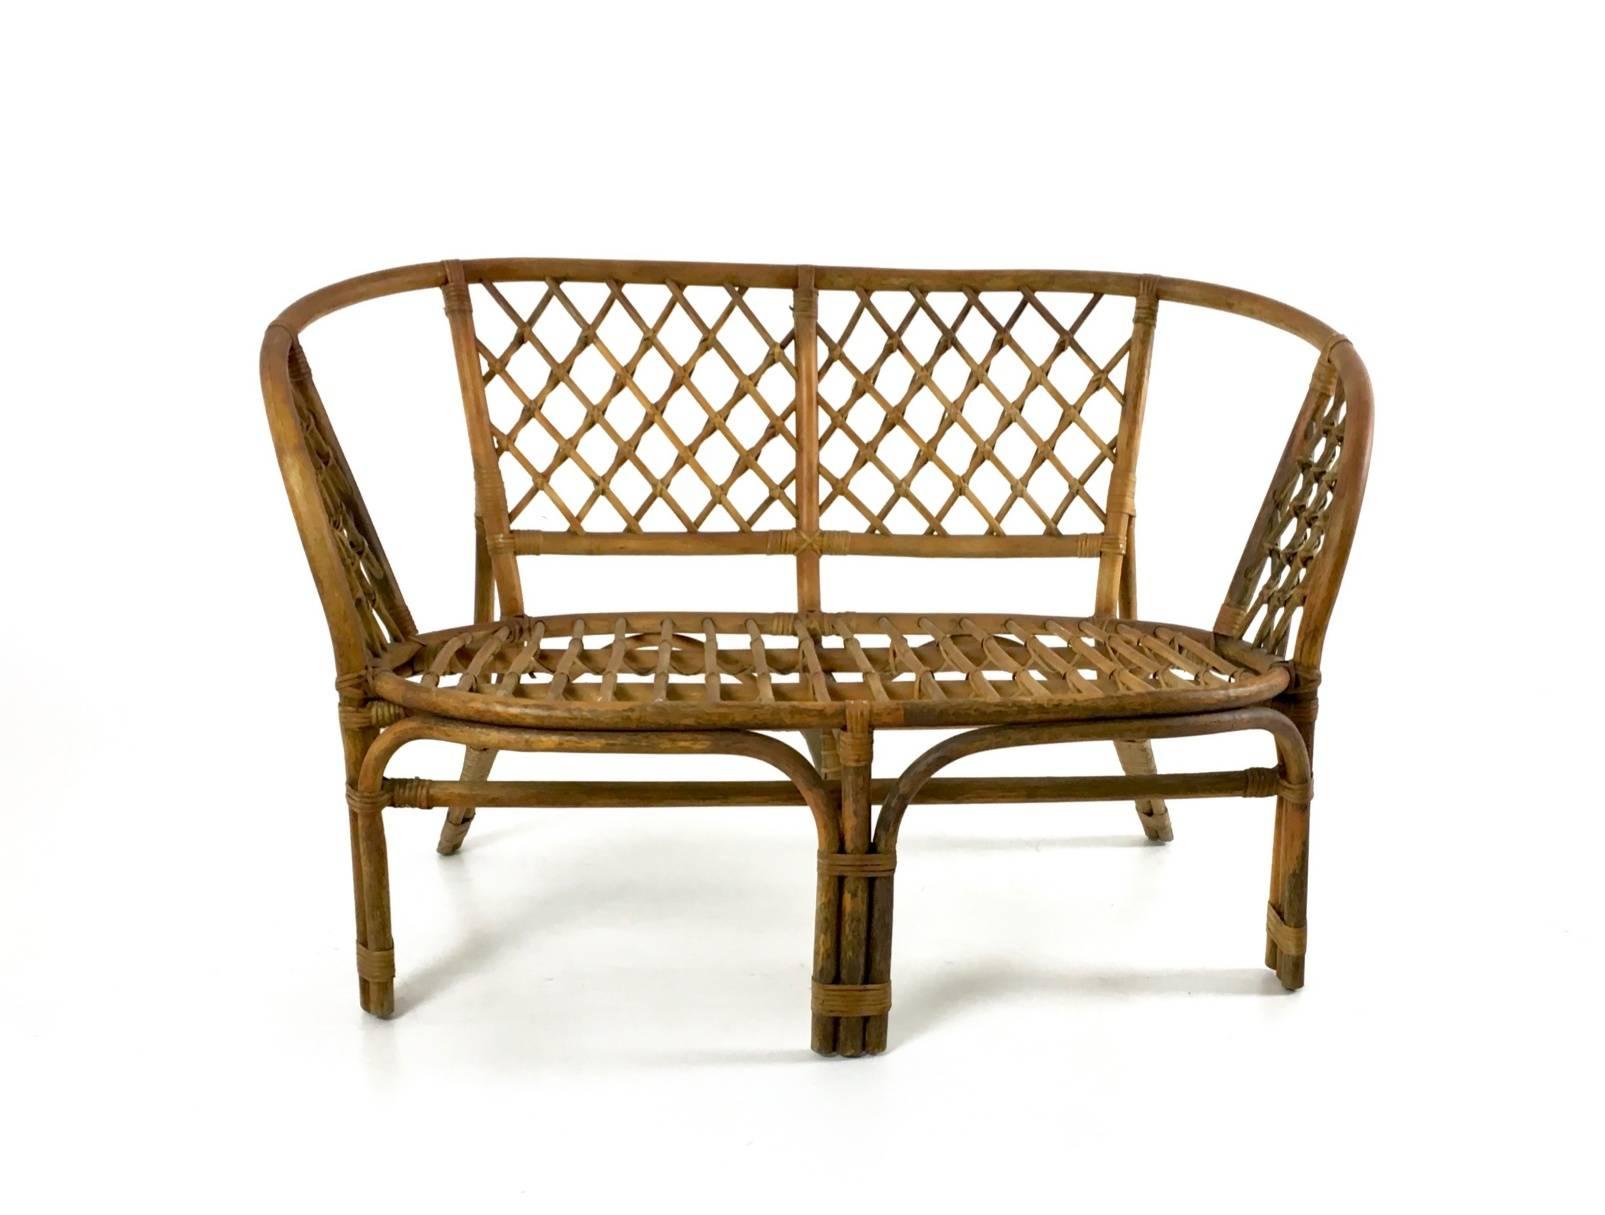 Made in wicker. 
In excellent original condition. 

Armchairs: 70 x 64 H 72 cm.
Sofa: 113 x 64 h 72 cm